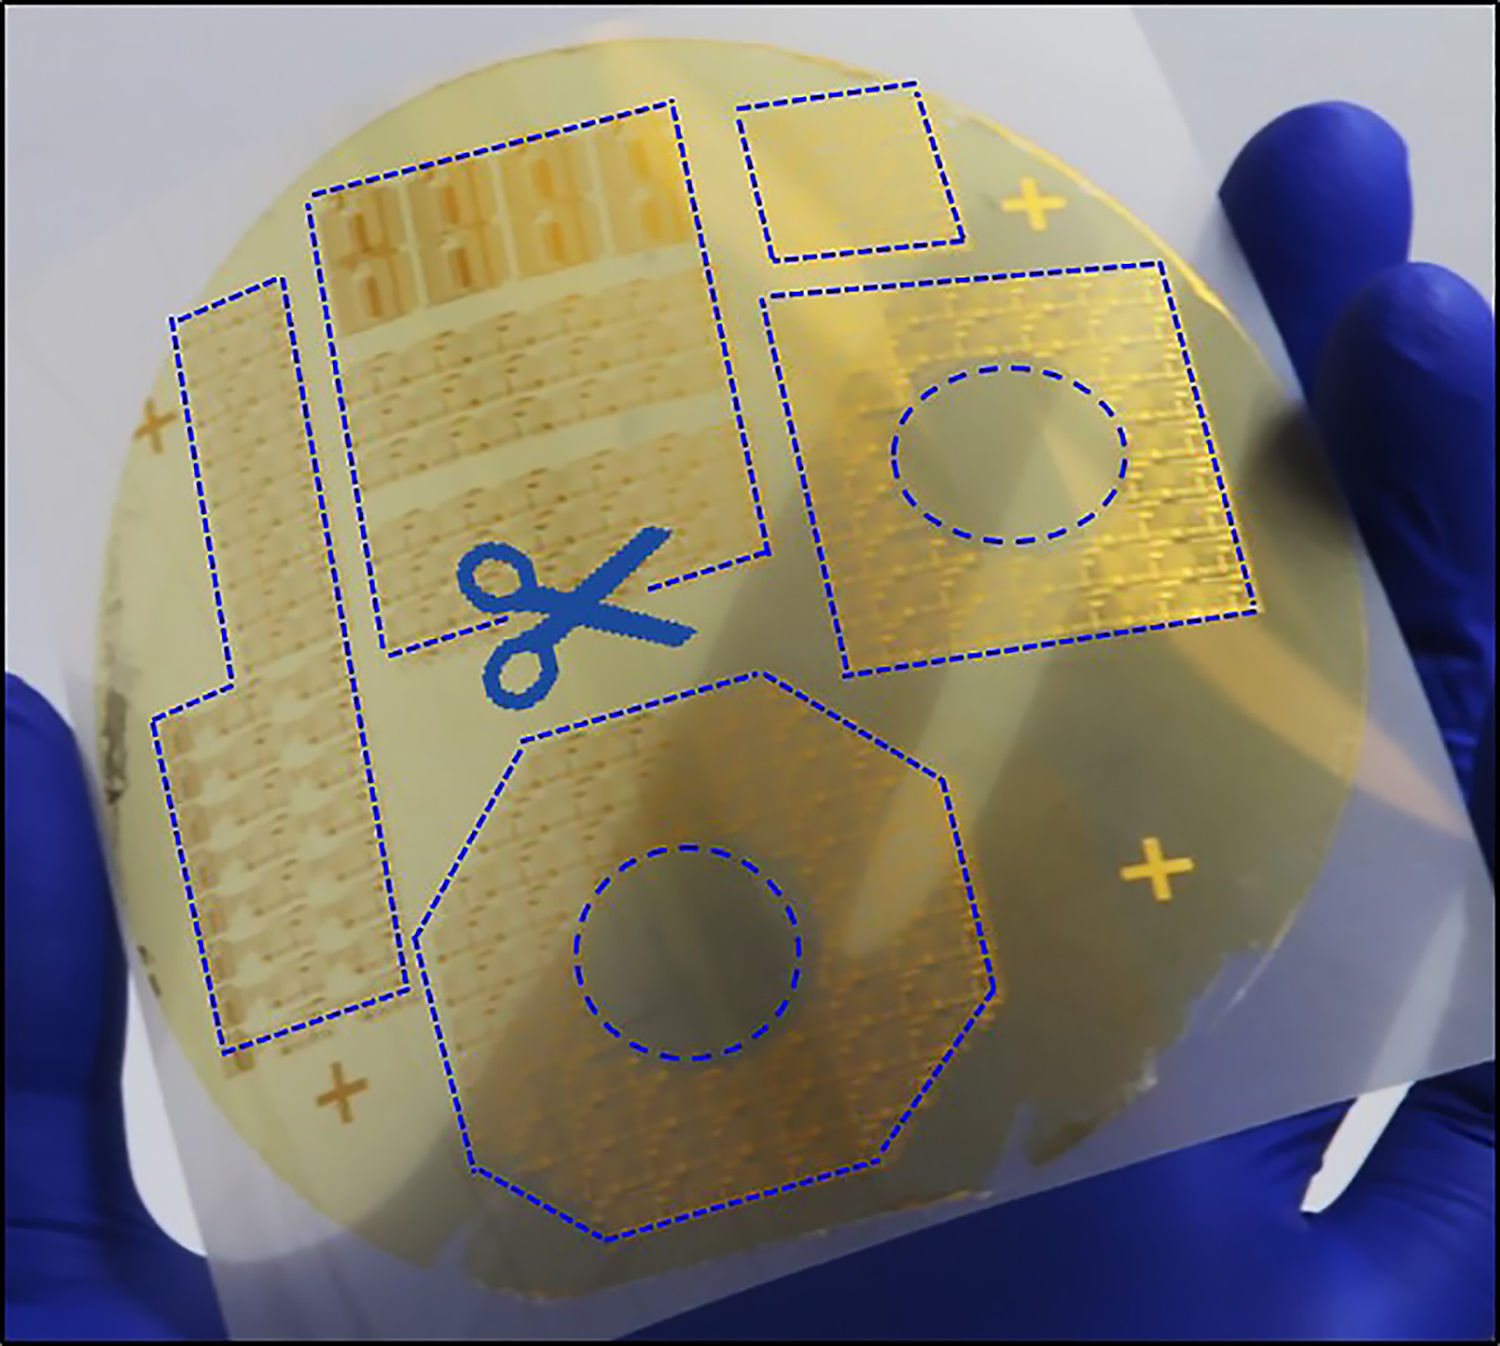 Researchers have designed peelable electronic films that can be cut and pasted onto any object to achieve desired functions. (Purdue University image/Chi Hwan Lee)